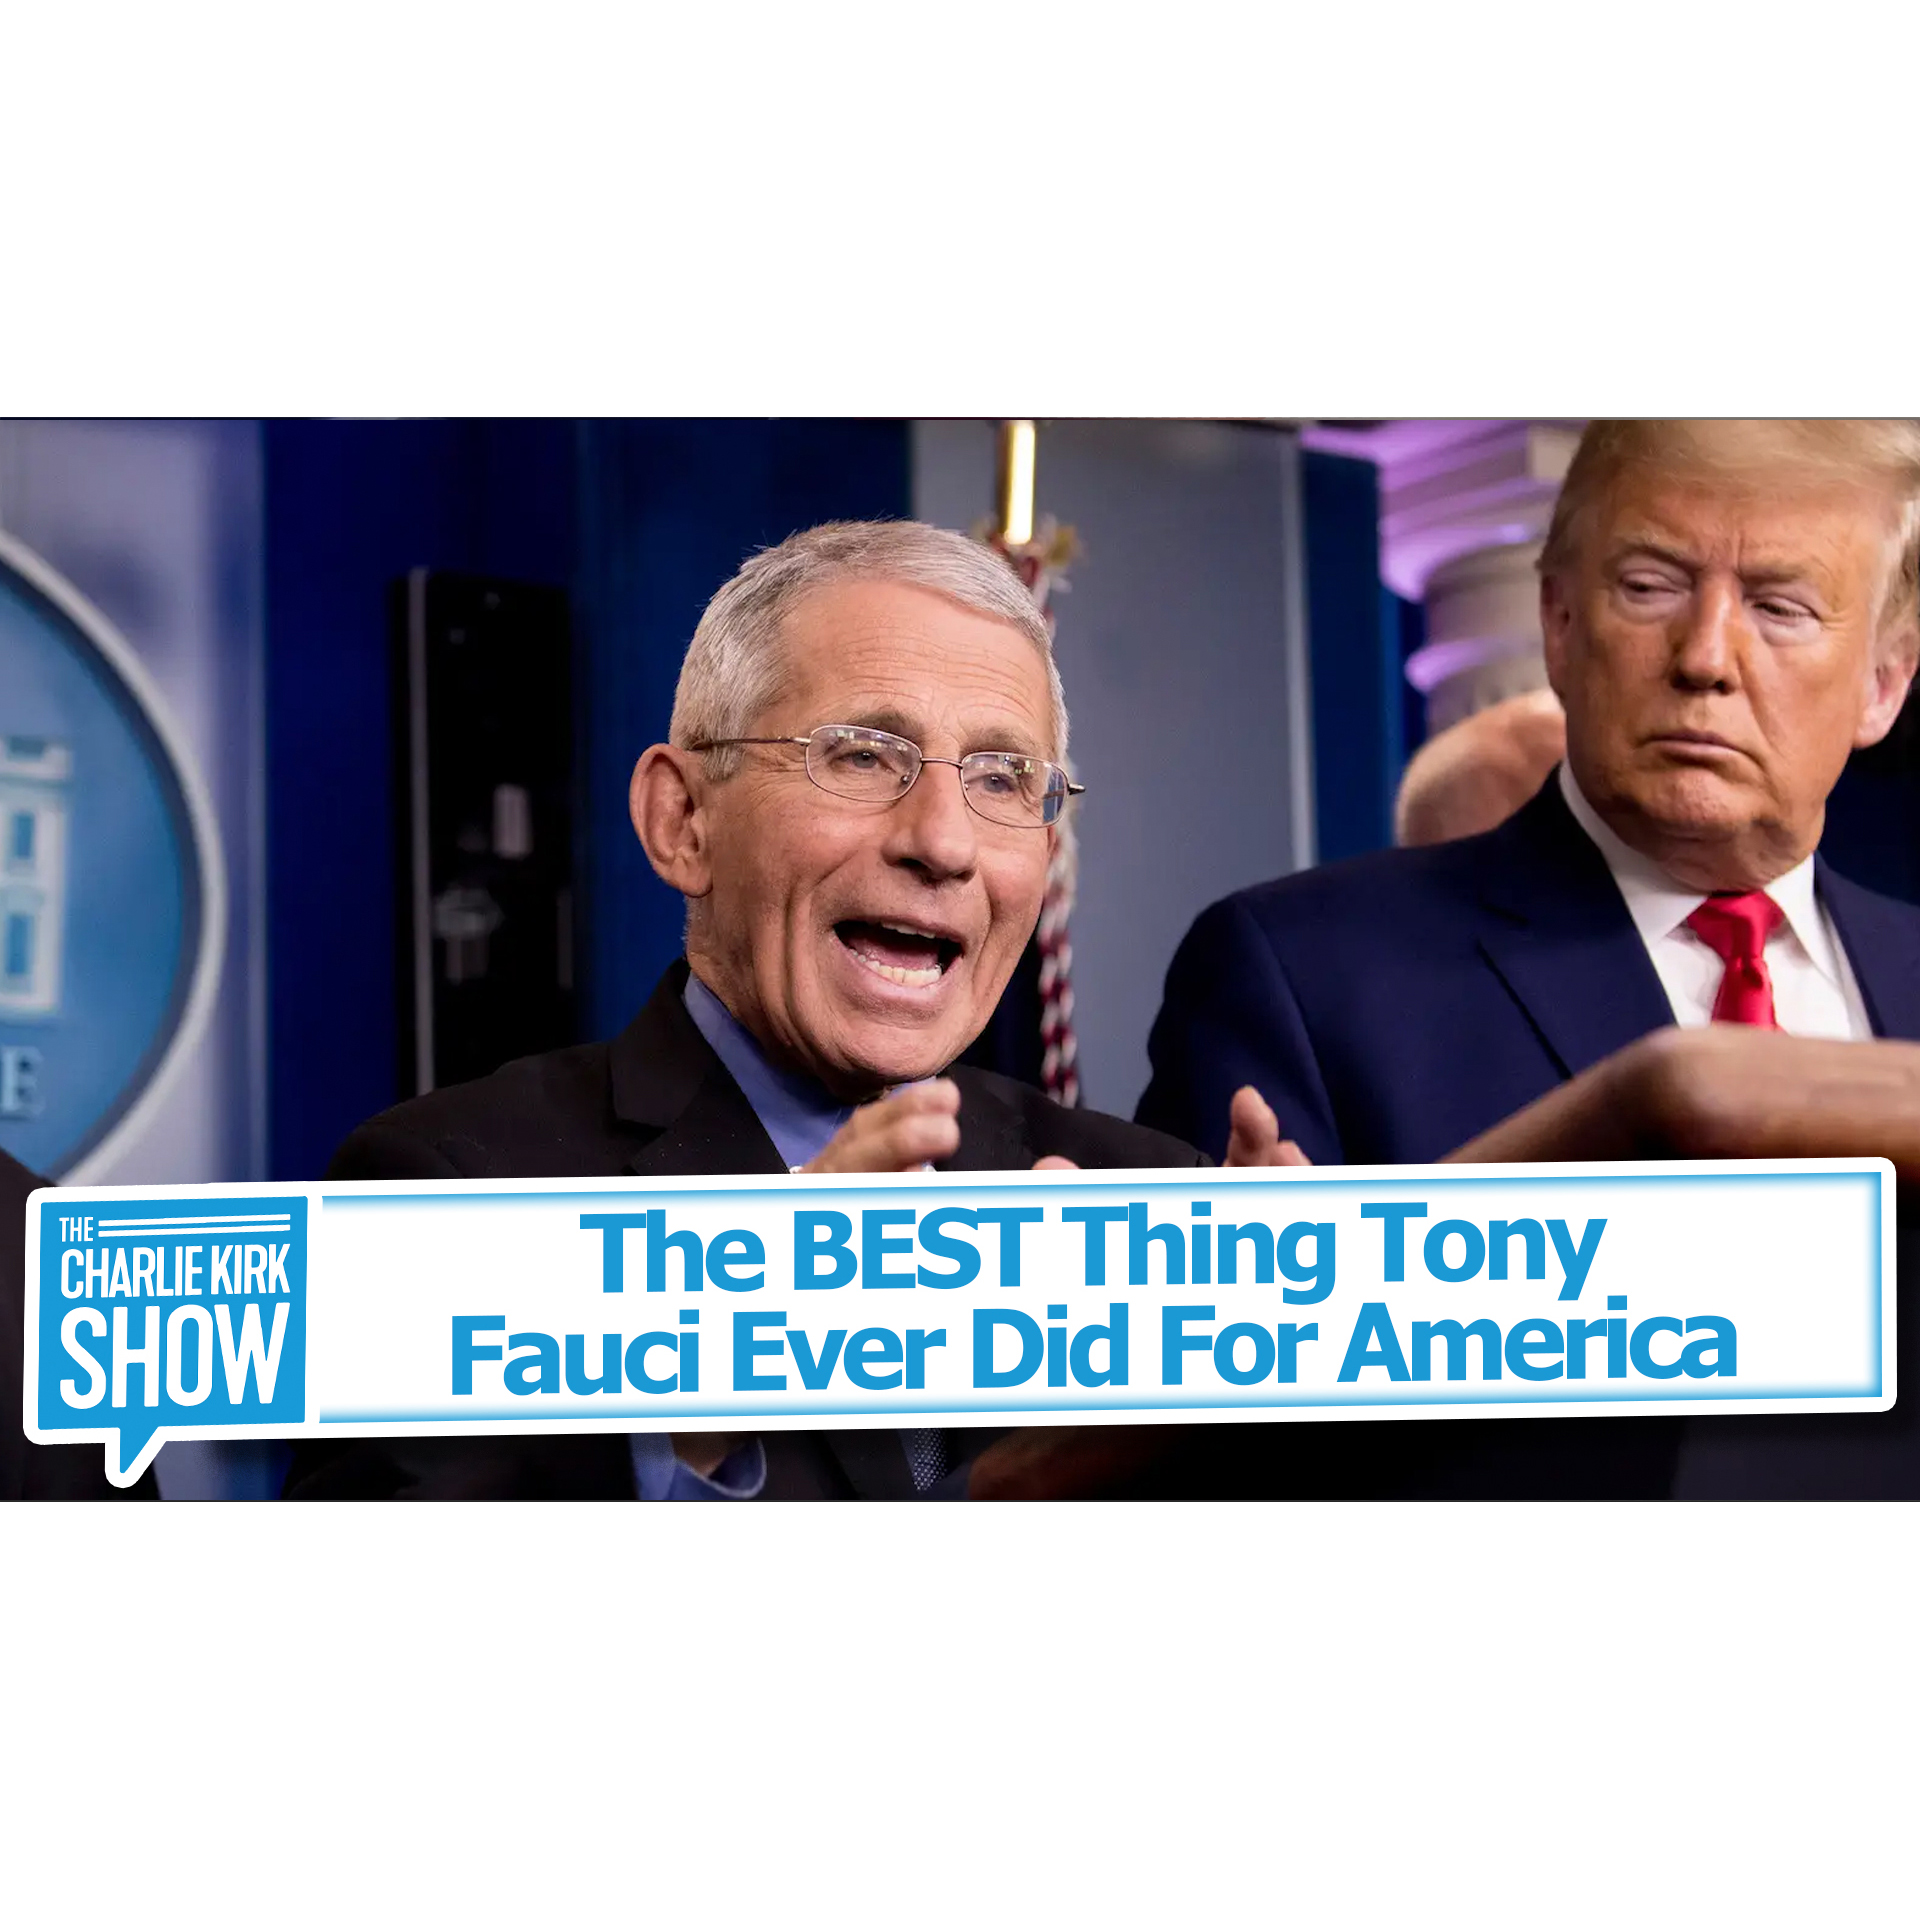 The BEST Thing Tony Fauci Ever Did For America